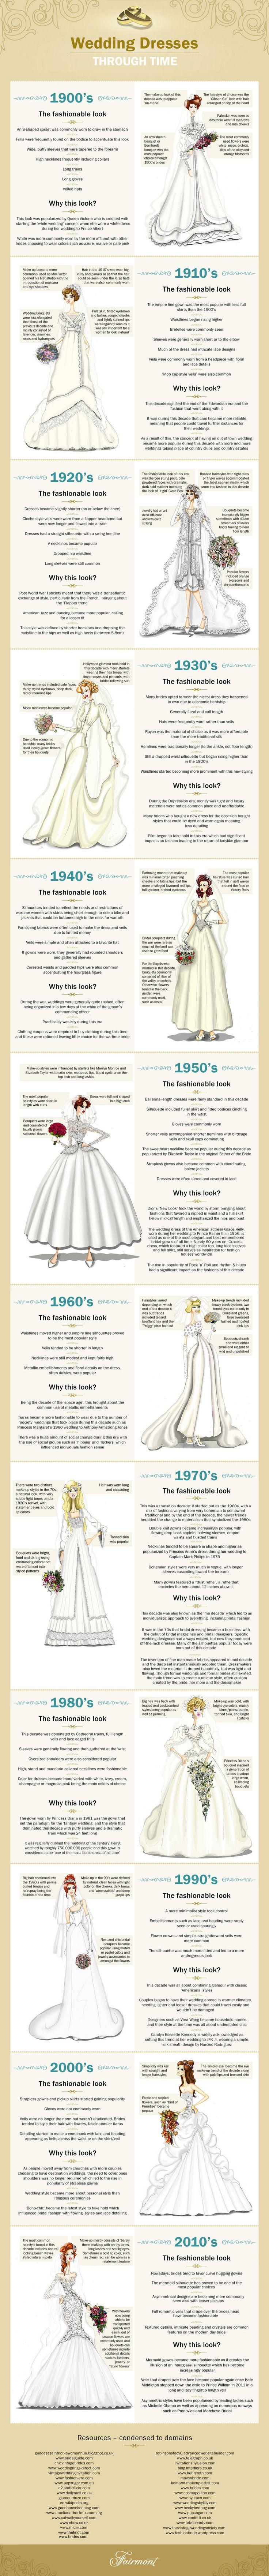 Hochzeit - This Is How Wedding Dress Trends Have Changed Over The Last Century